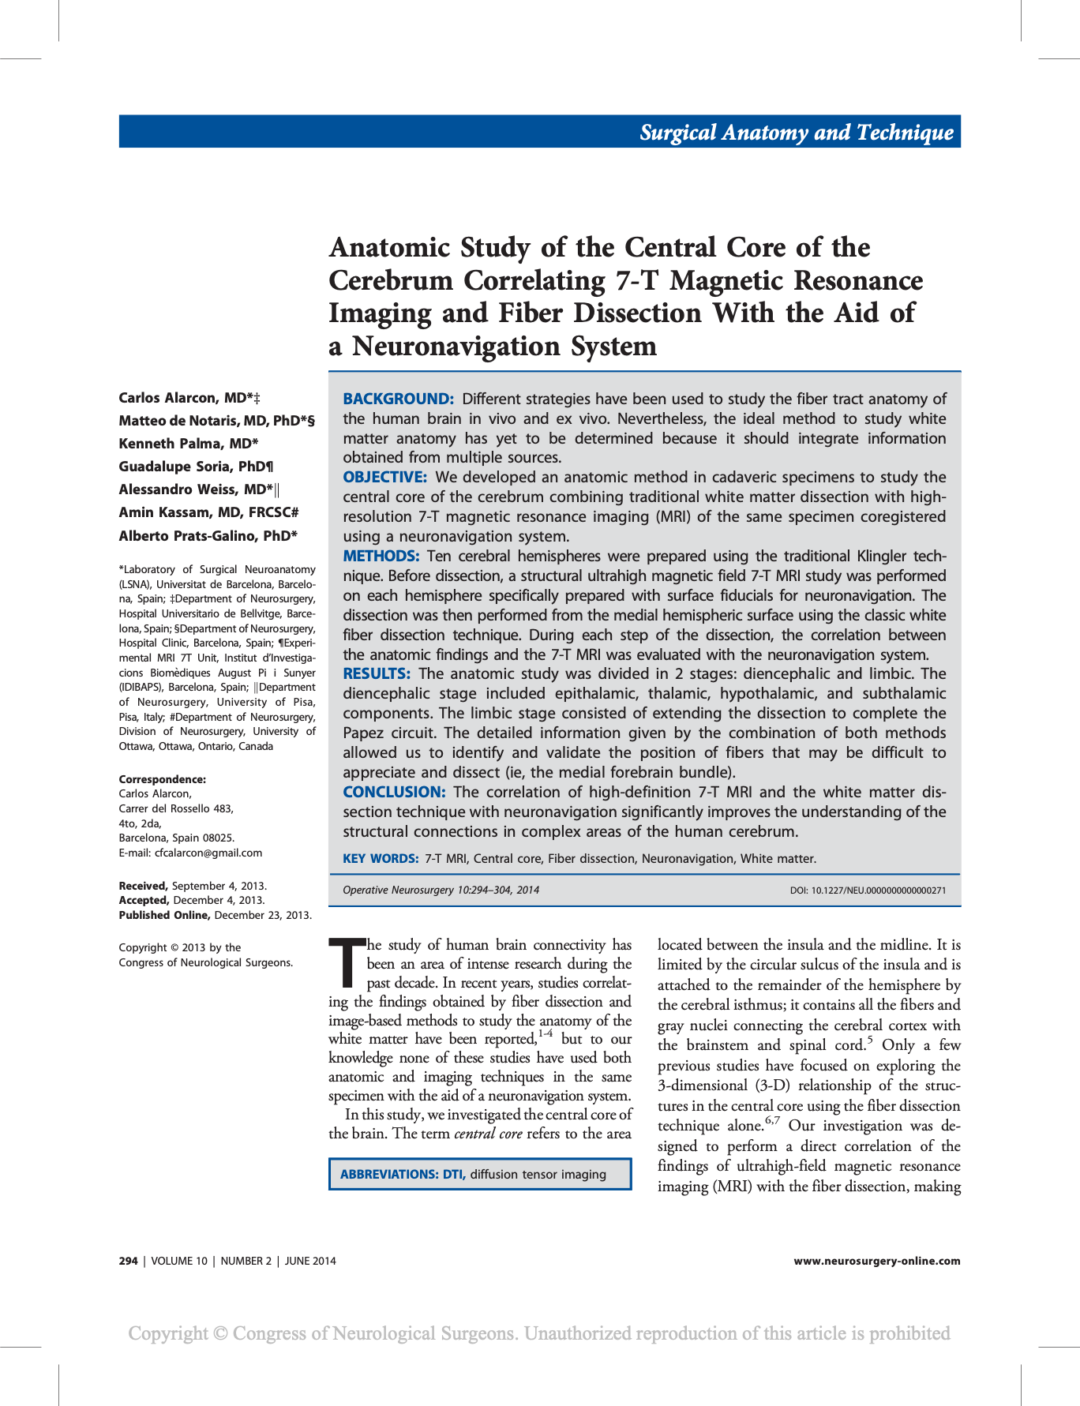 Anatomic Study of the Central Core of the Cerebrum Correlating 7-T Magnetic Resonance Imaging and Fiber Dissection With the Aid of a Neuronavigation System